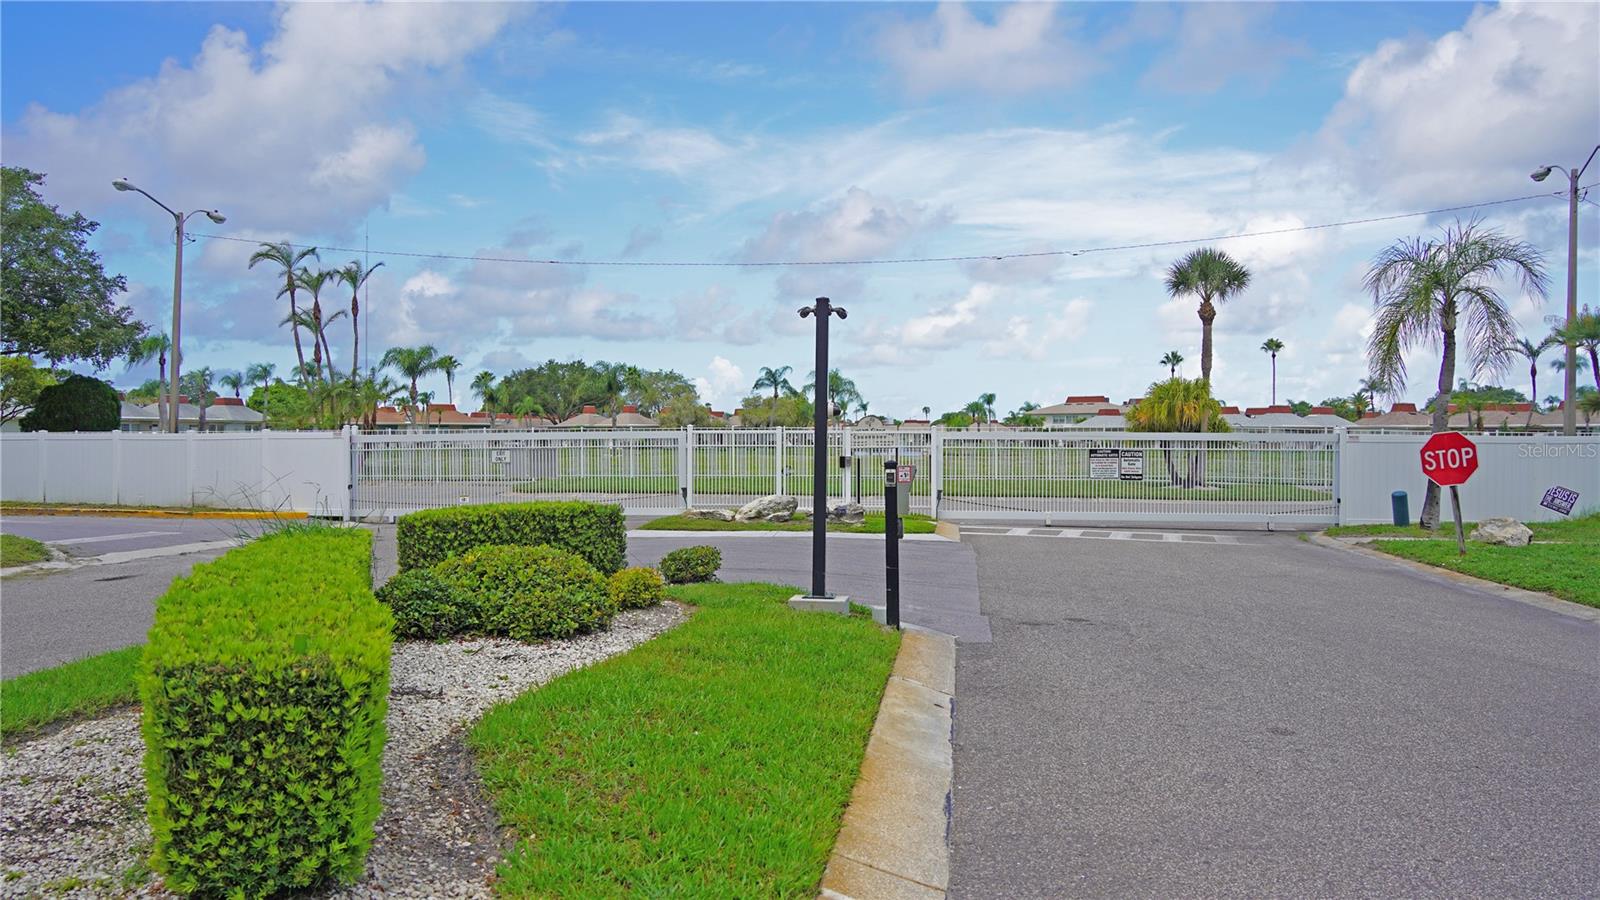 Peace of mind awaits! Rest easy knowing your community is secured with a gate, providing optimal security for you and your loved ones.